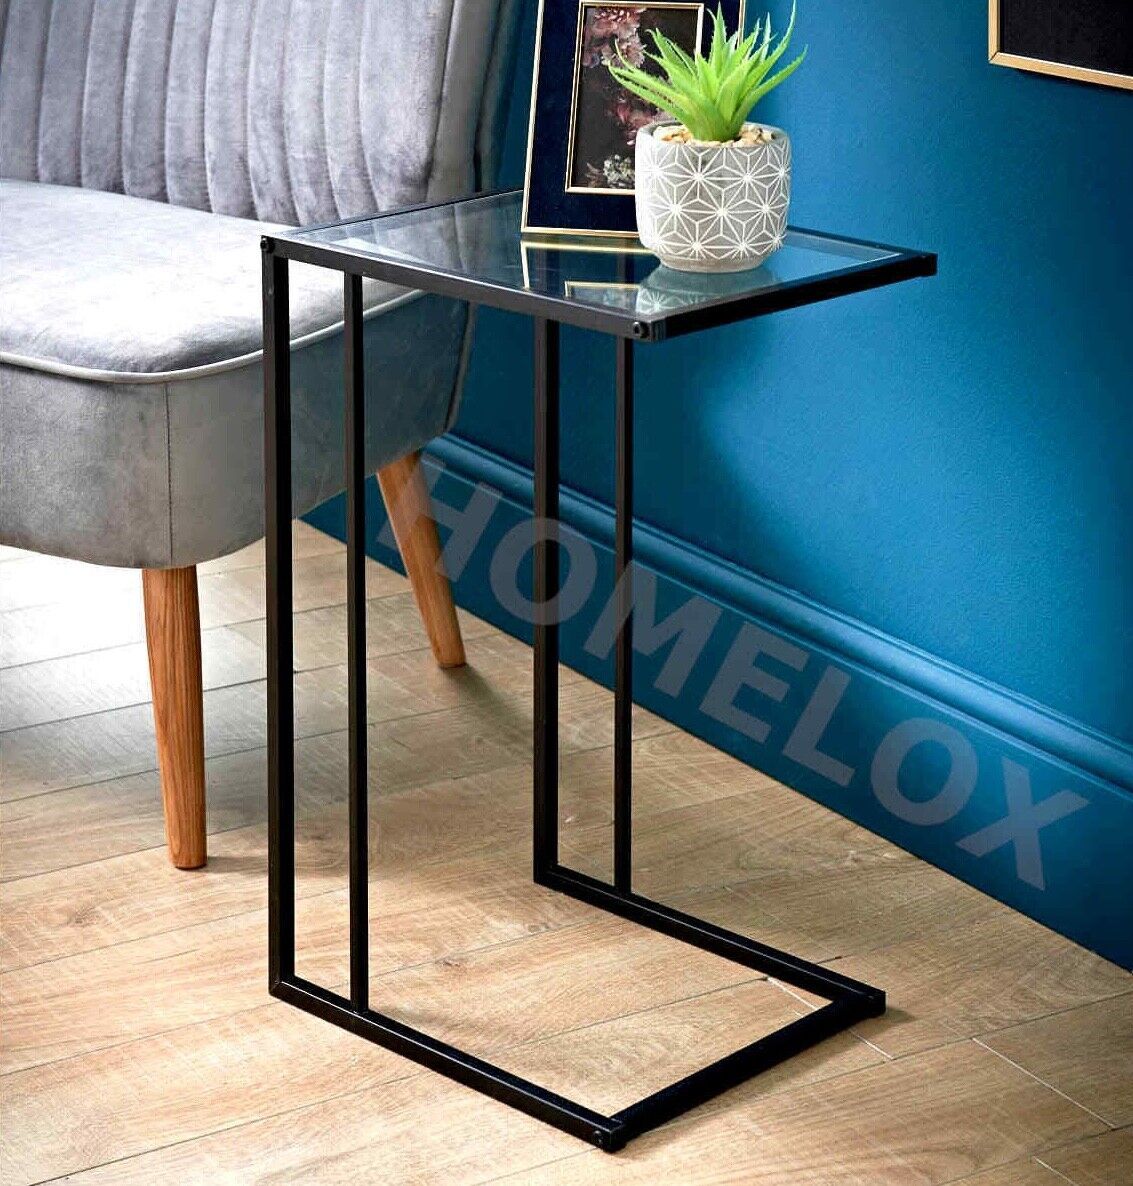 Sofa Side Table Black With Clear Glass Top Coffee End Table For Living Room  | Ebay In Transparent Side Tables For Living Rooms (View 3 of 15)